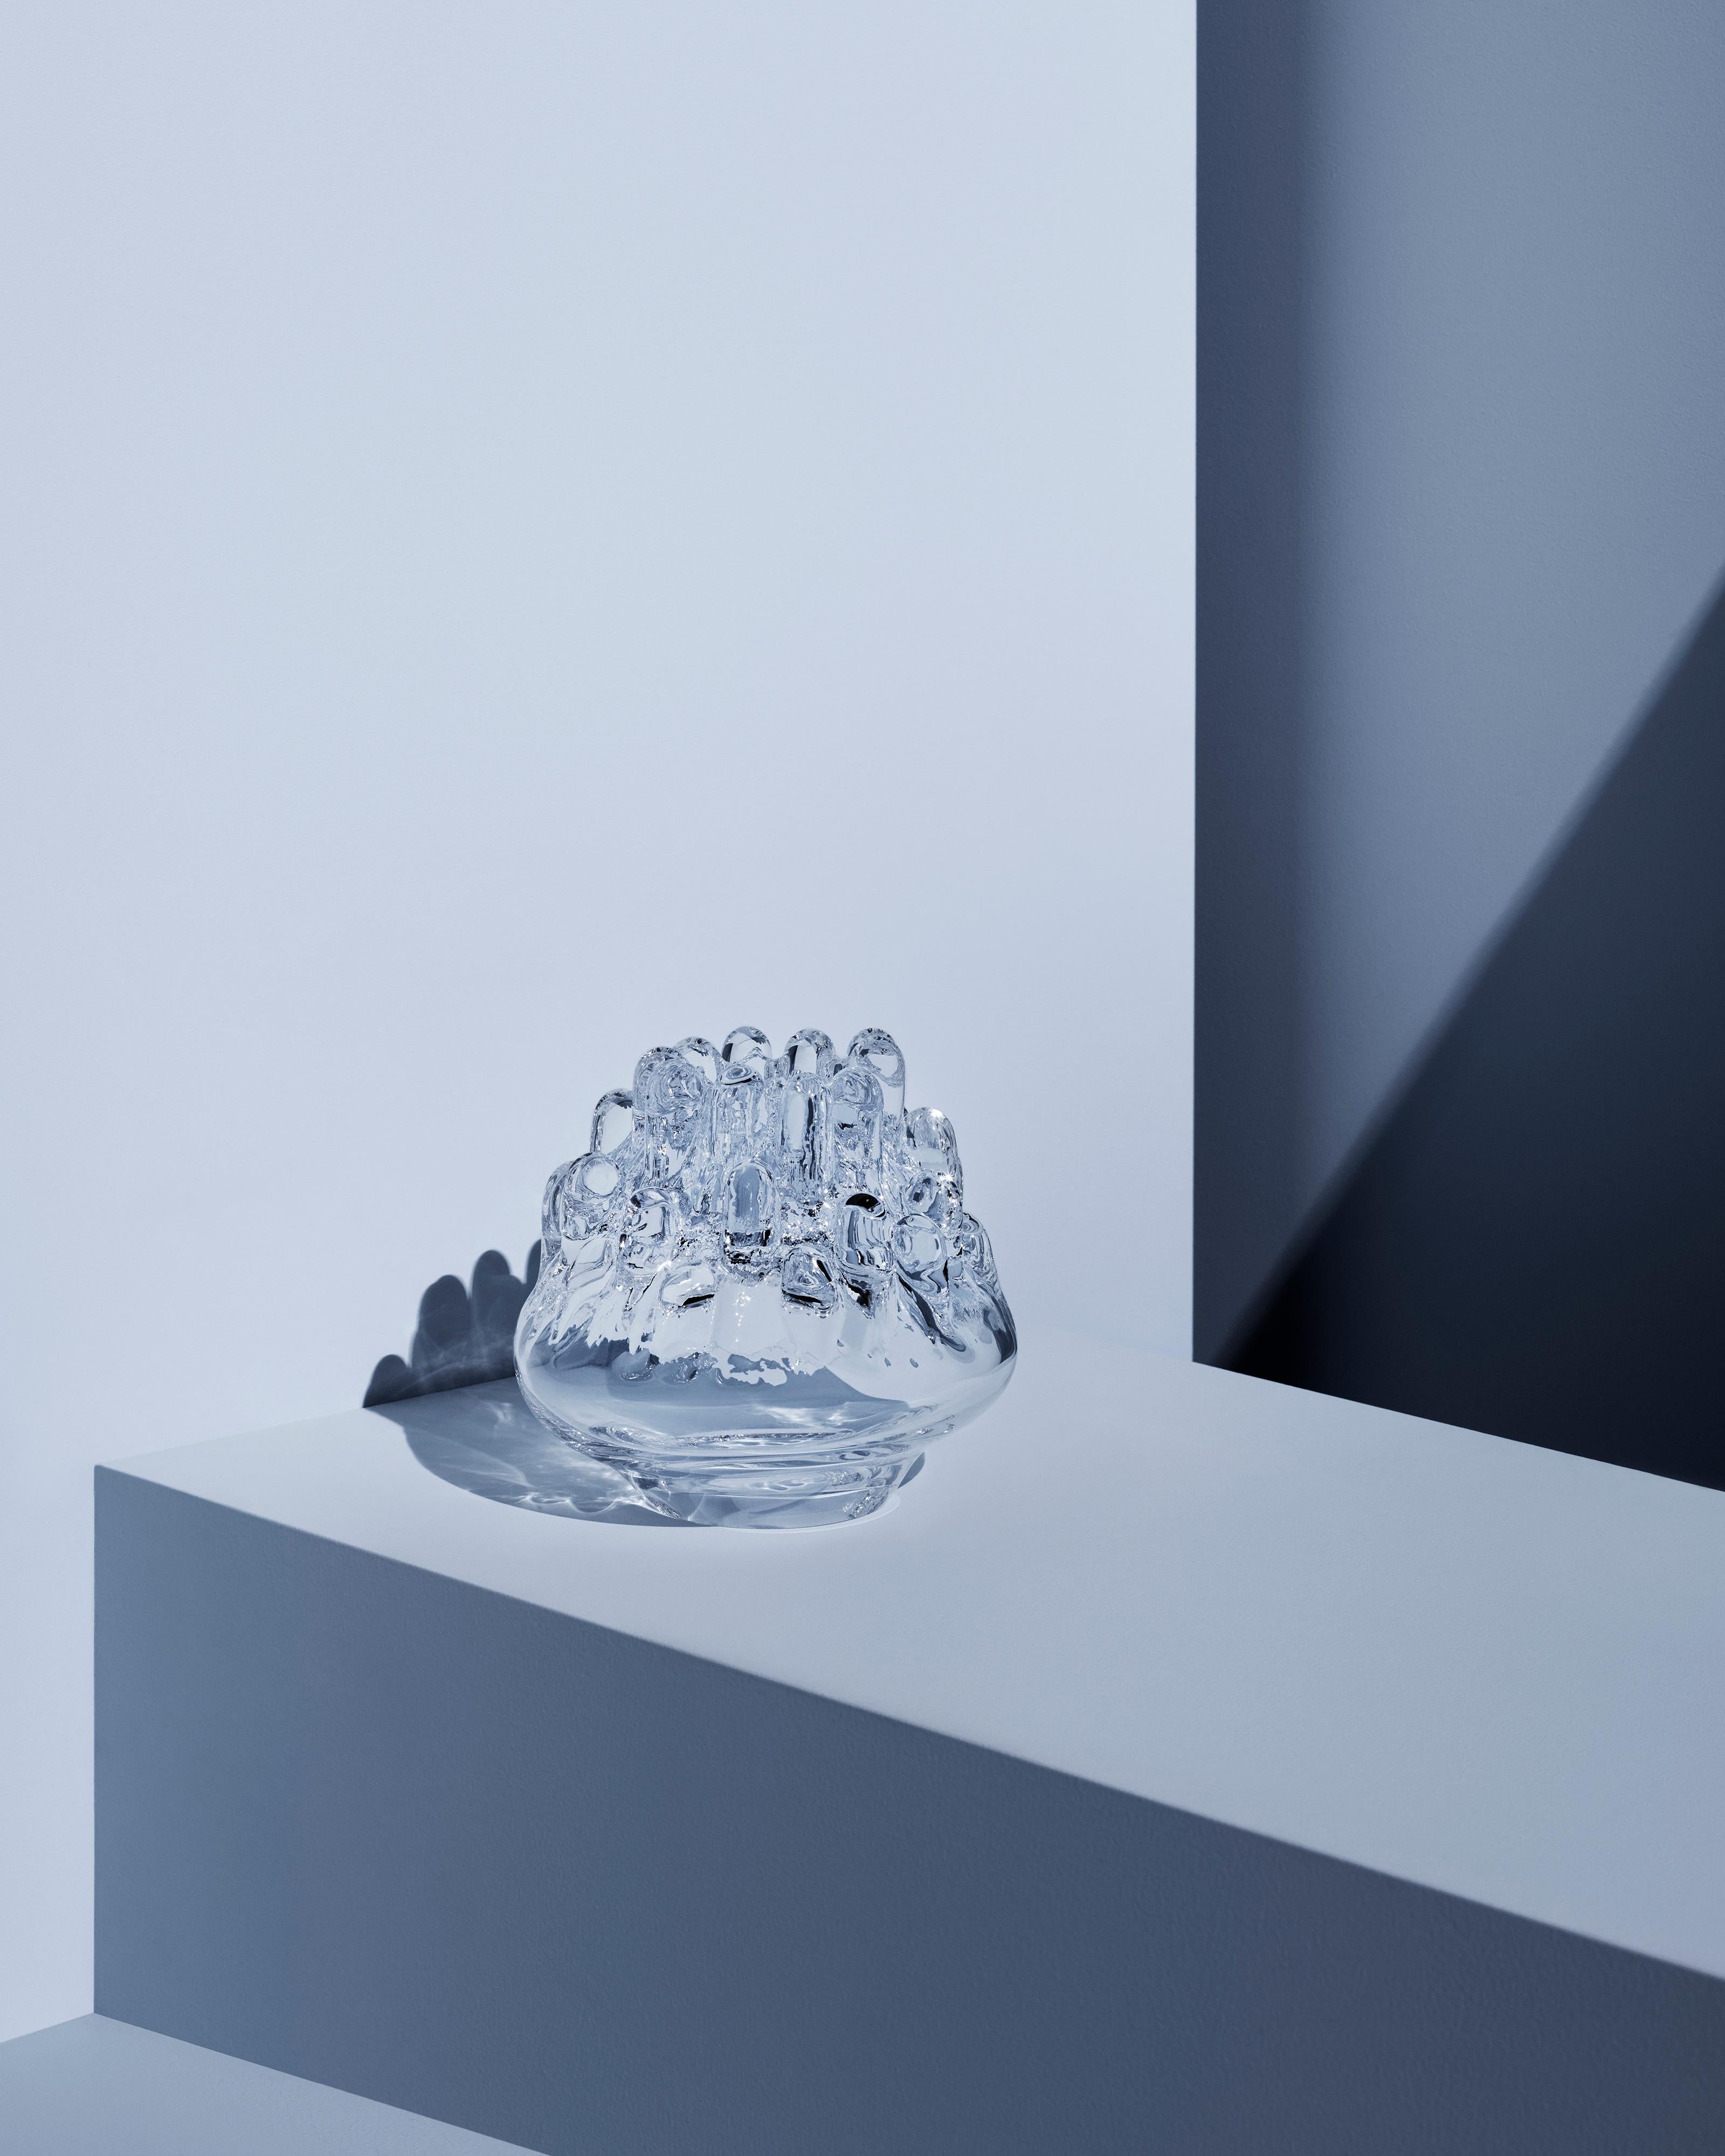 Made as a unique gift from Sweden to the Sydney Opera House (True Story), Polar from Kosta Boda was born from a love of light, nature, and ice. It's a votive candle holder, but it's also a glass sculpture and a beautiful design object. This iconic